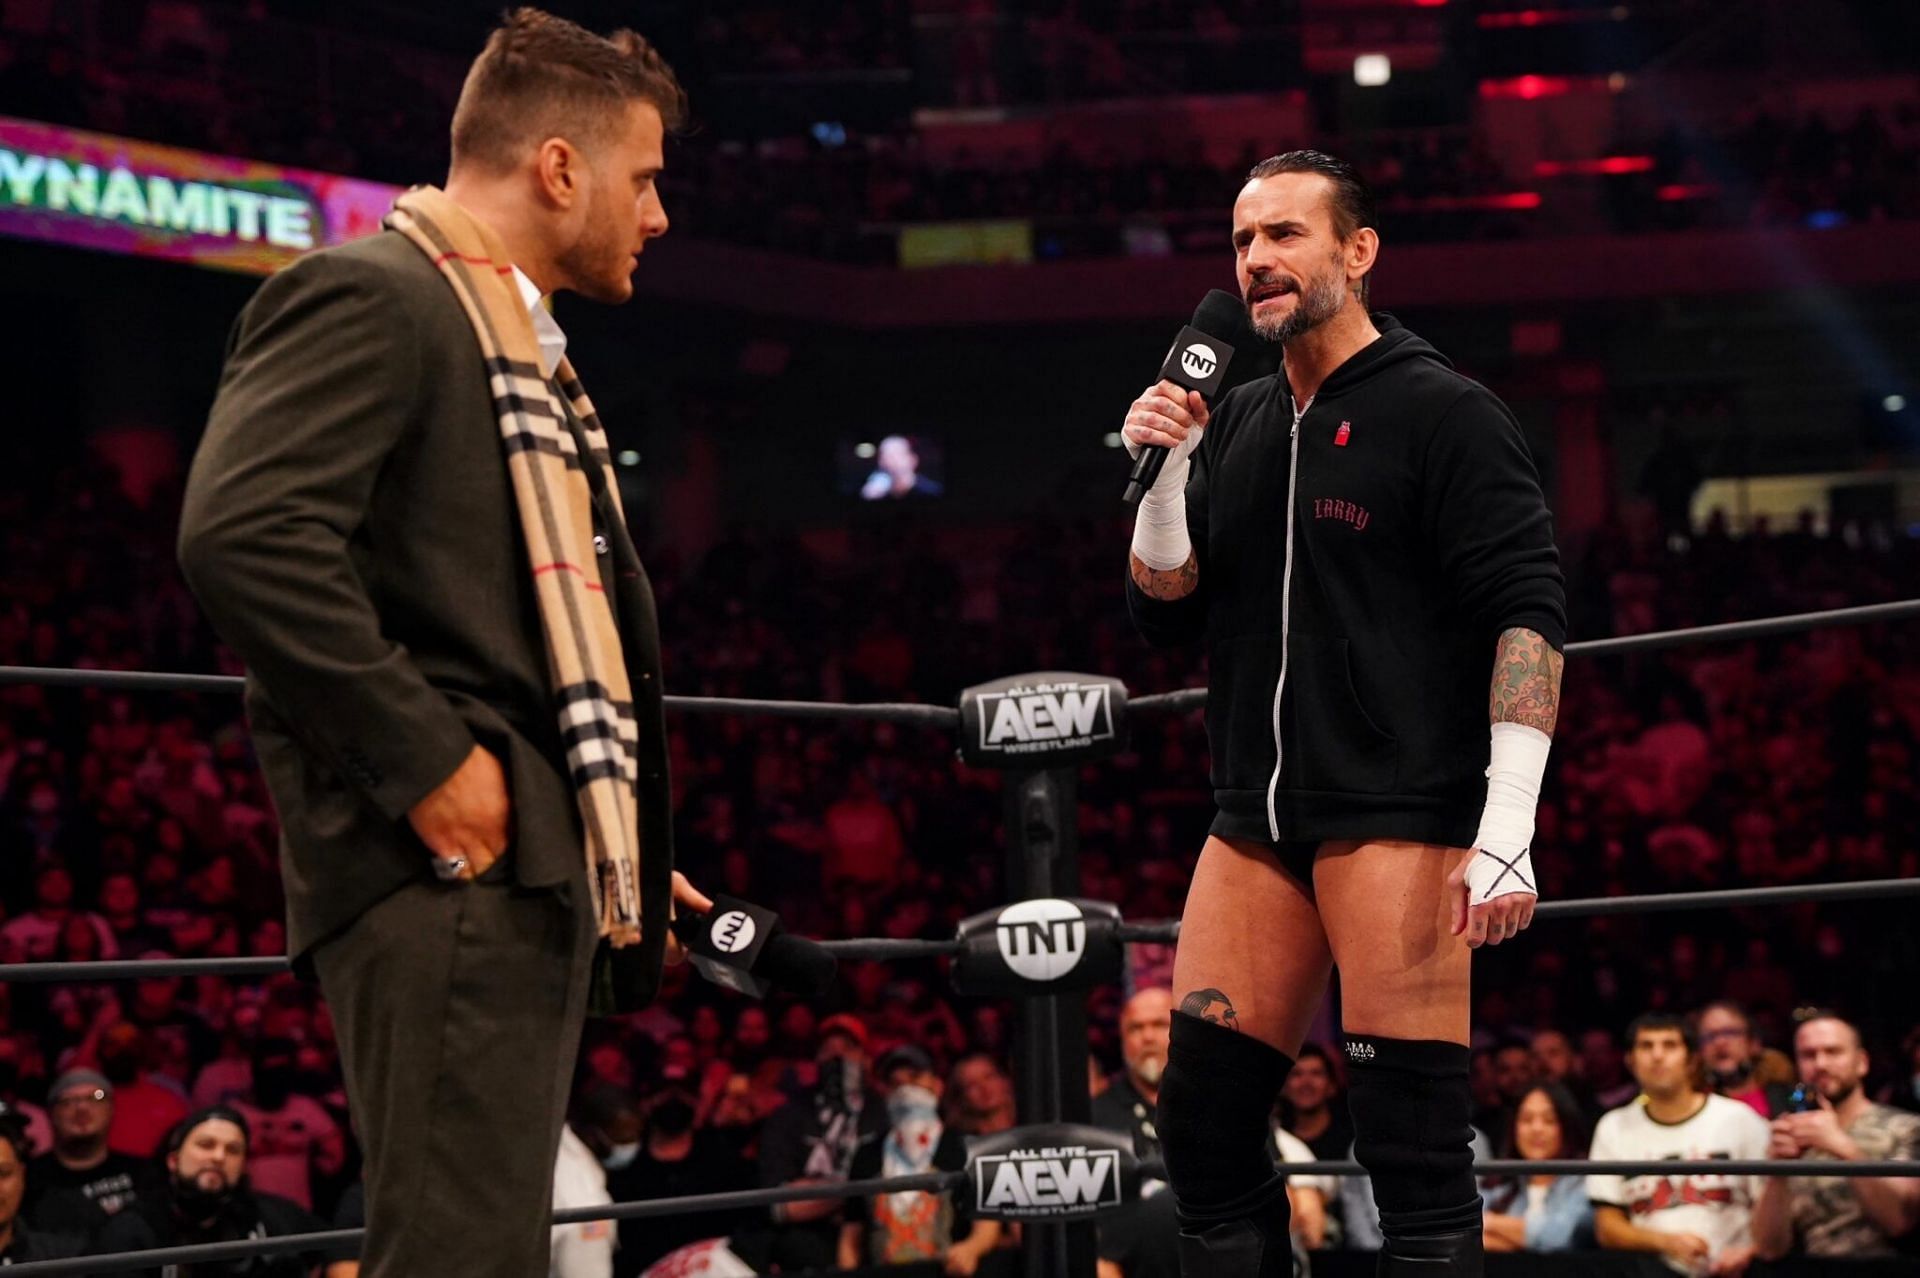 CM Punk and MJF produced one of the best wrestling segments on AEW Dynamite